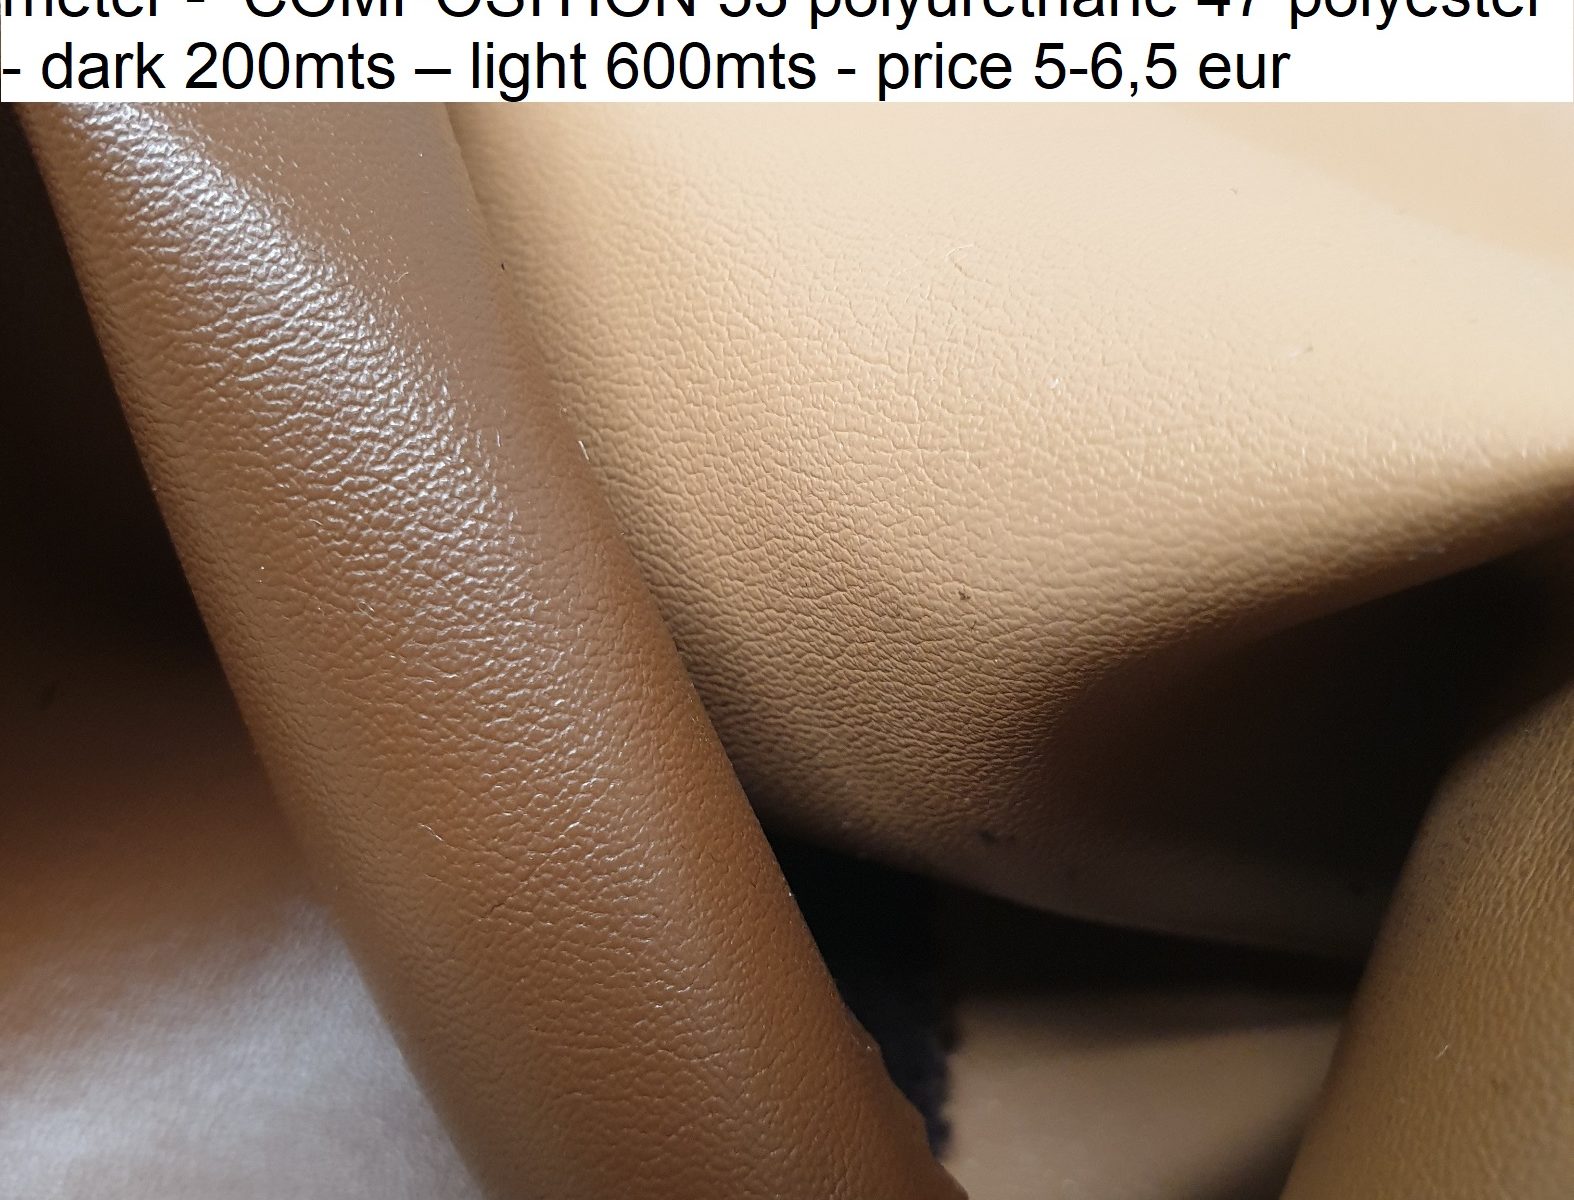 7868 ecoleather chamois backside for pants jackets skirts WIDTH cm130 WEIGHT gr440 - gr338 square meter - COMPOSITION 53 polyurethane 47 polyester - dark 200mts – light 600mts - price 5-6,5 eur